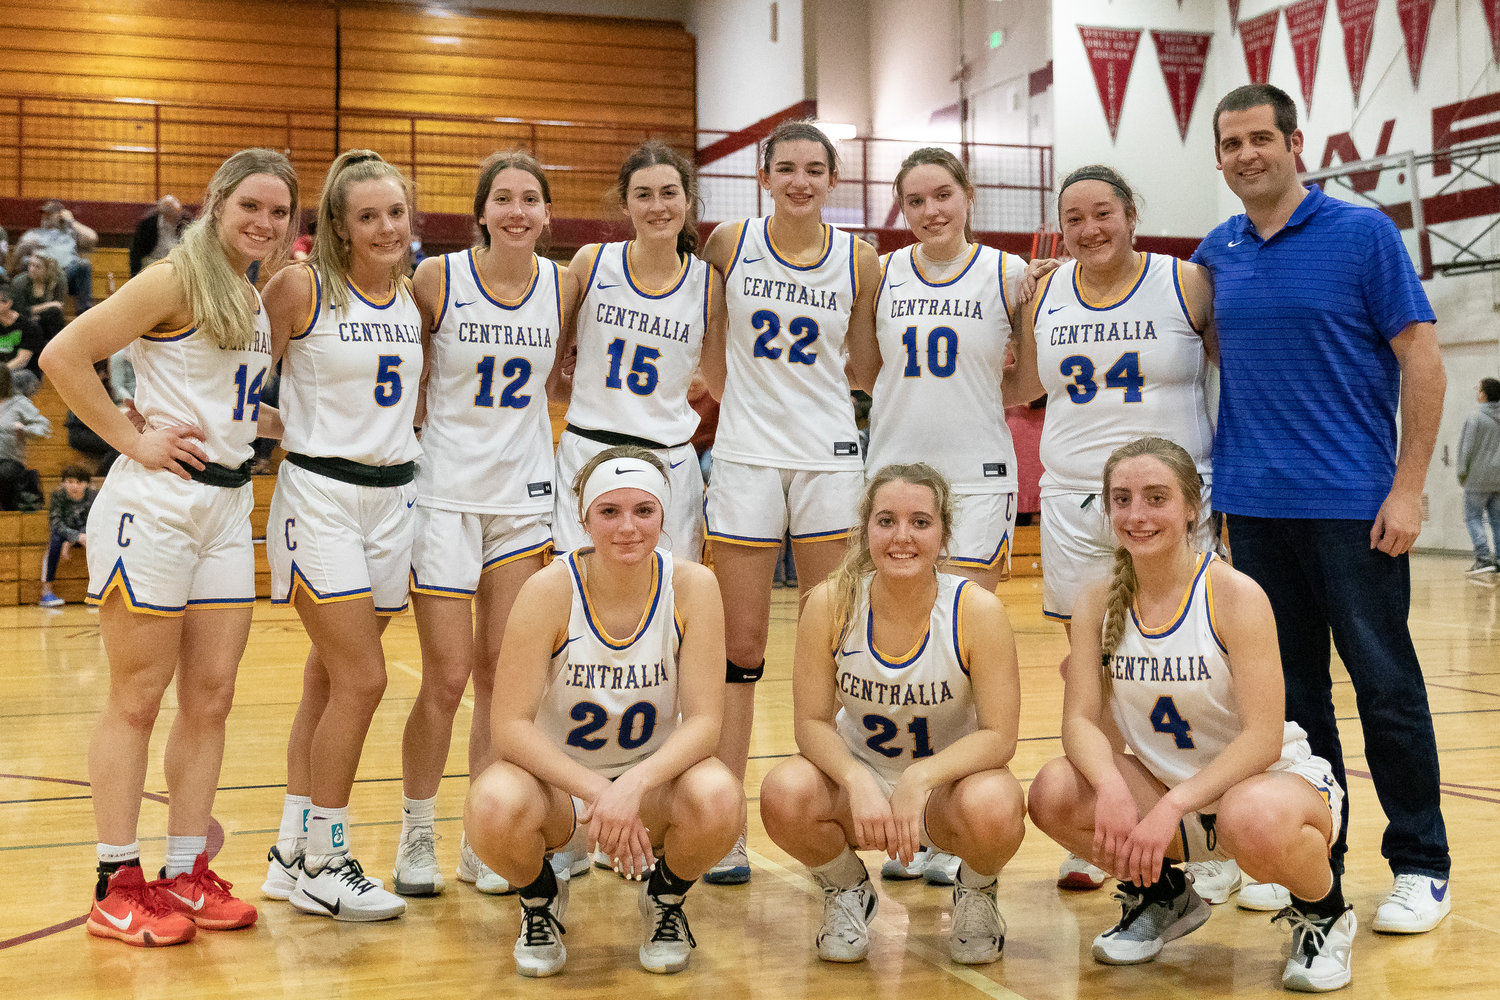 The SWW Senior All-Stars pose after competing in a game March 26 at W.F. West.